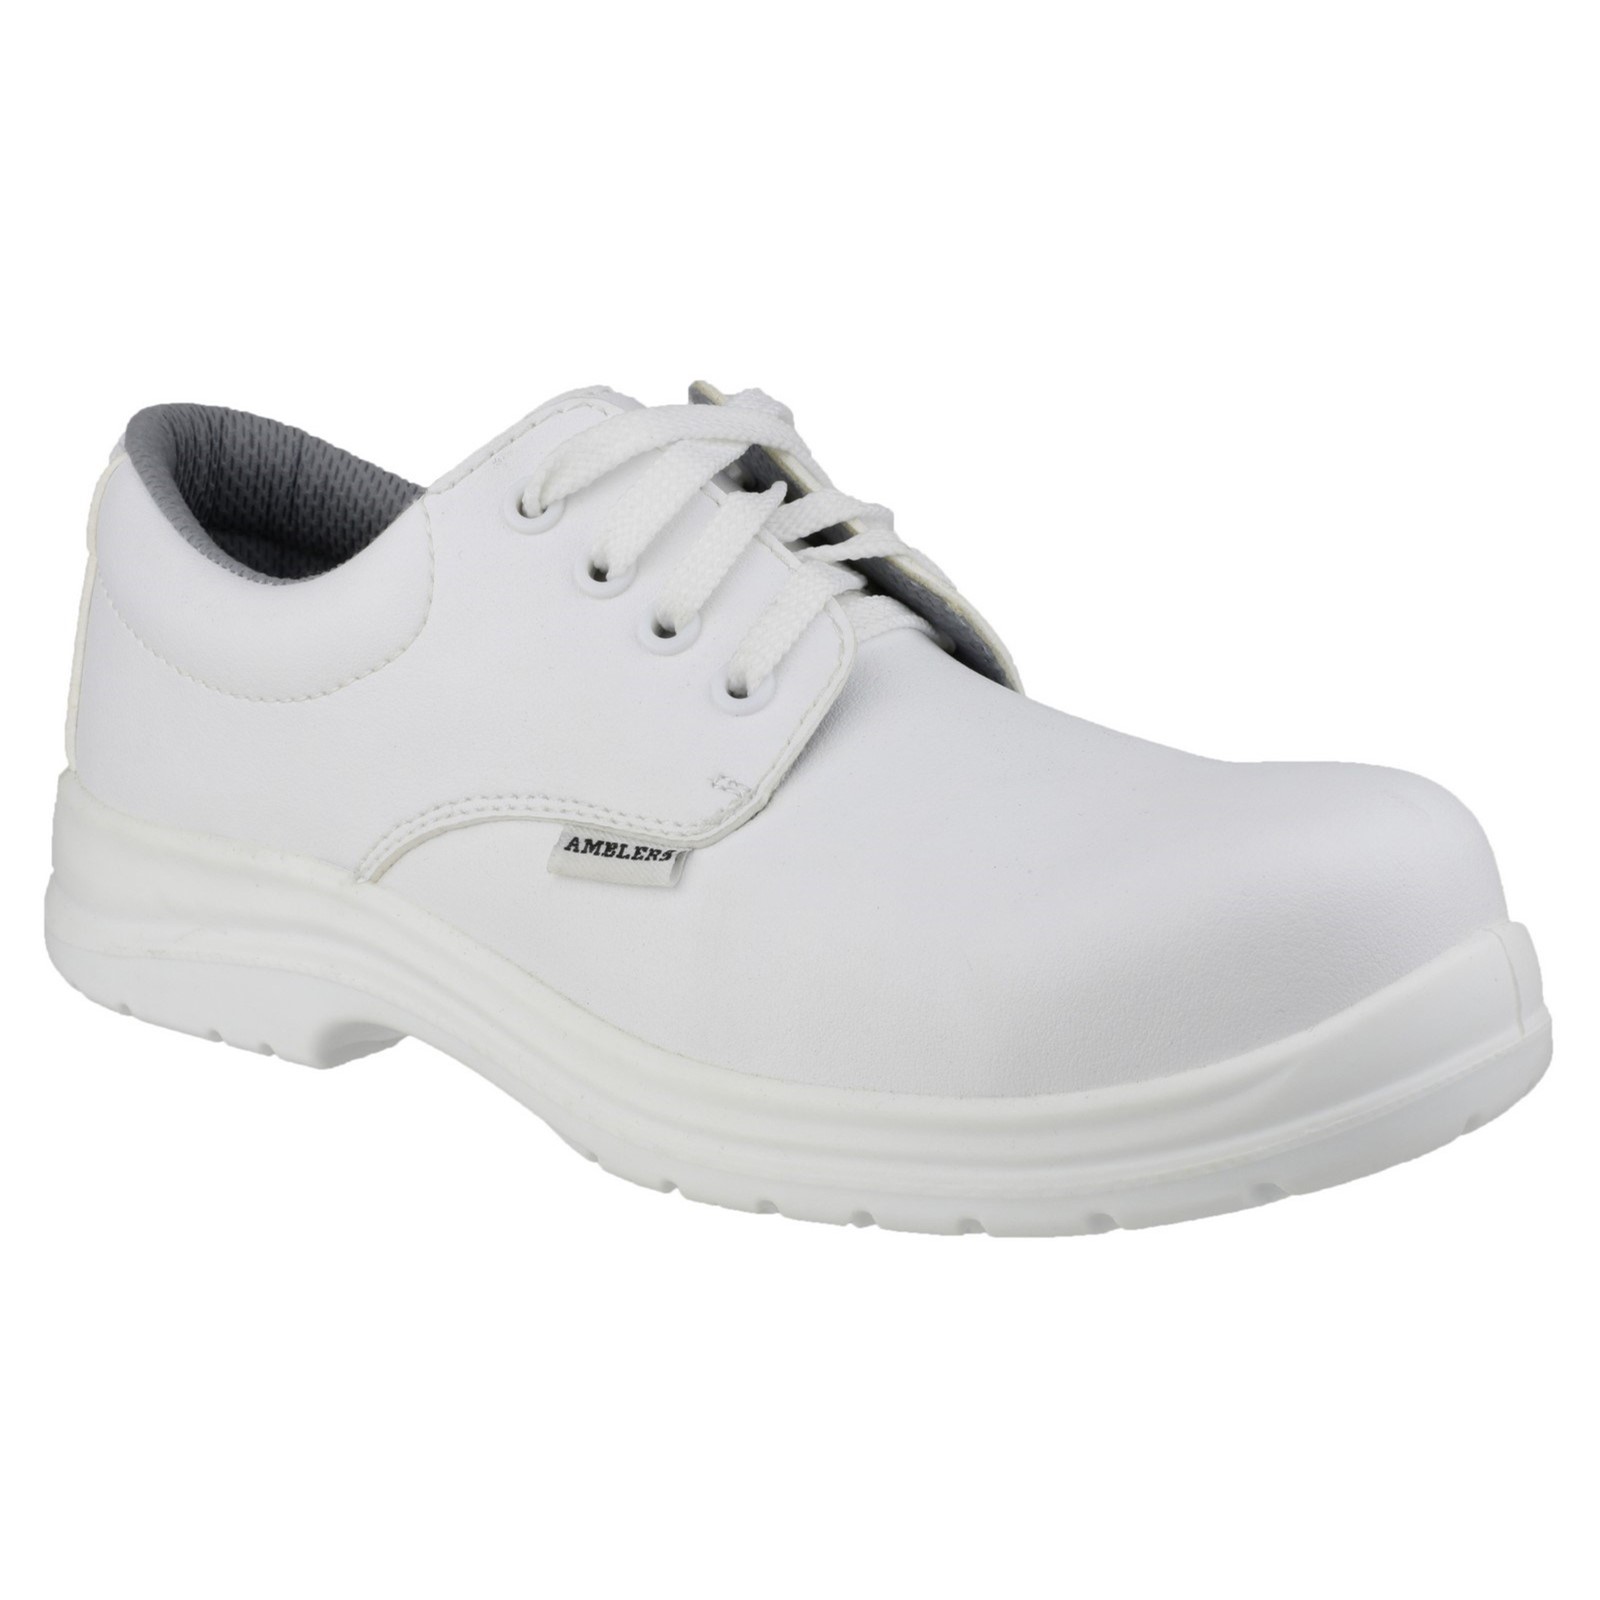 FS511 Metal-Free Water-Resistant Lace up Safety Shoe